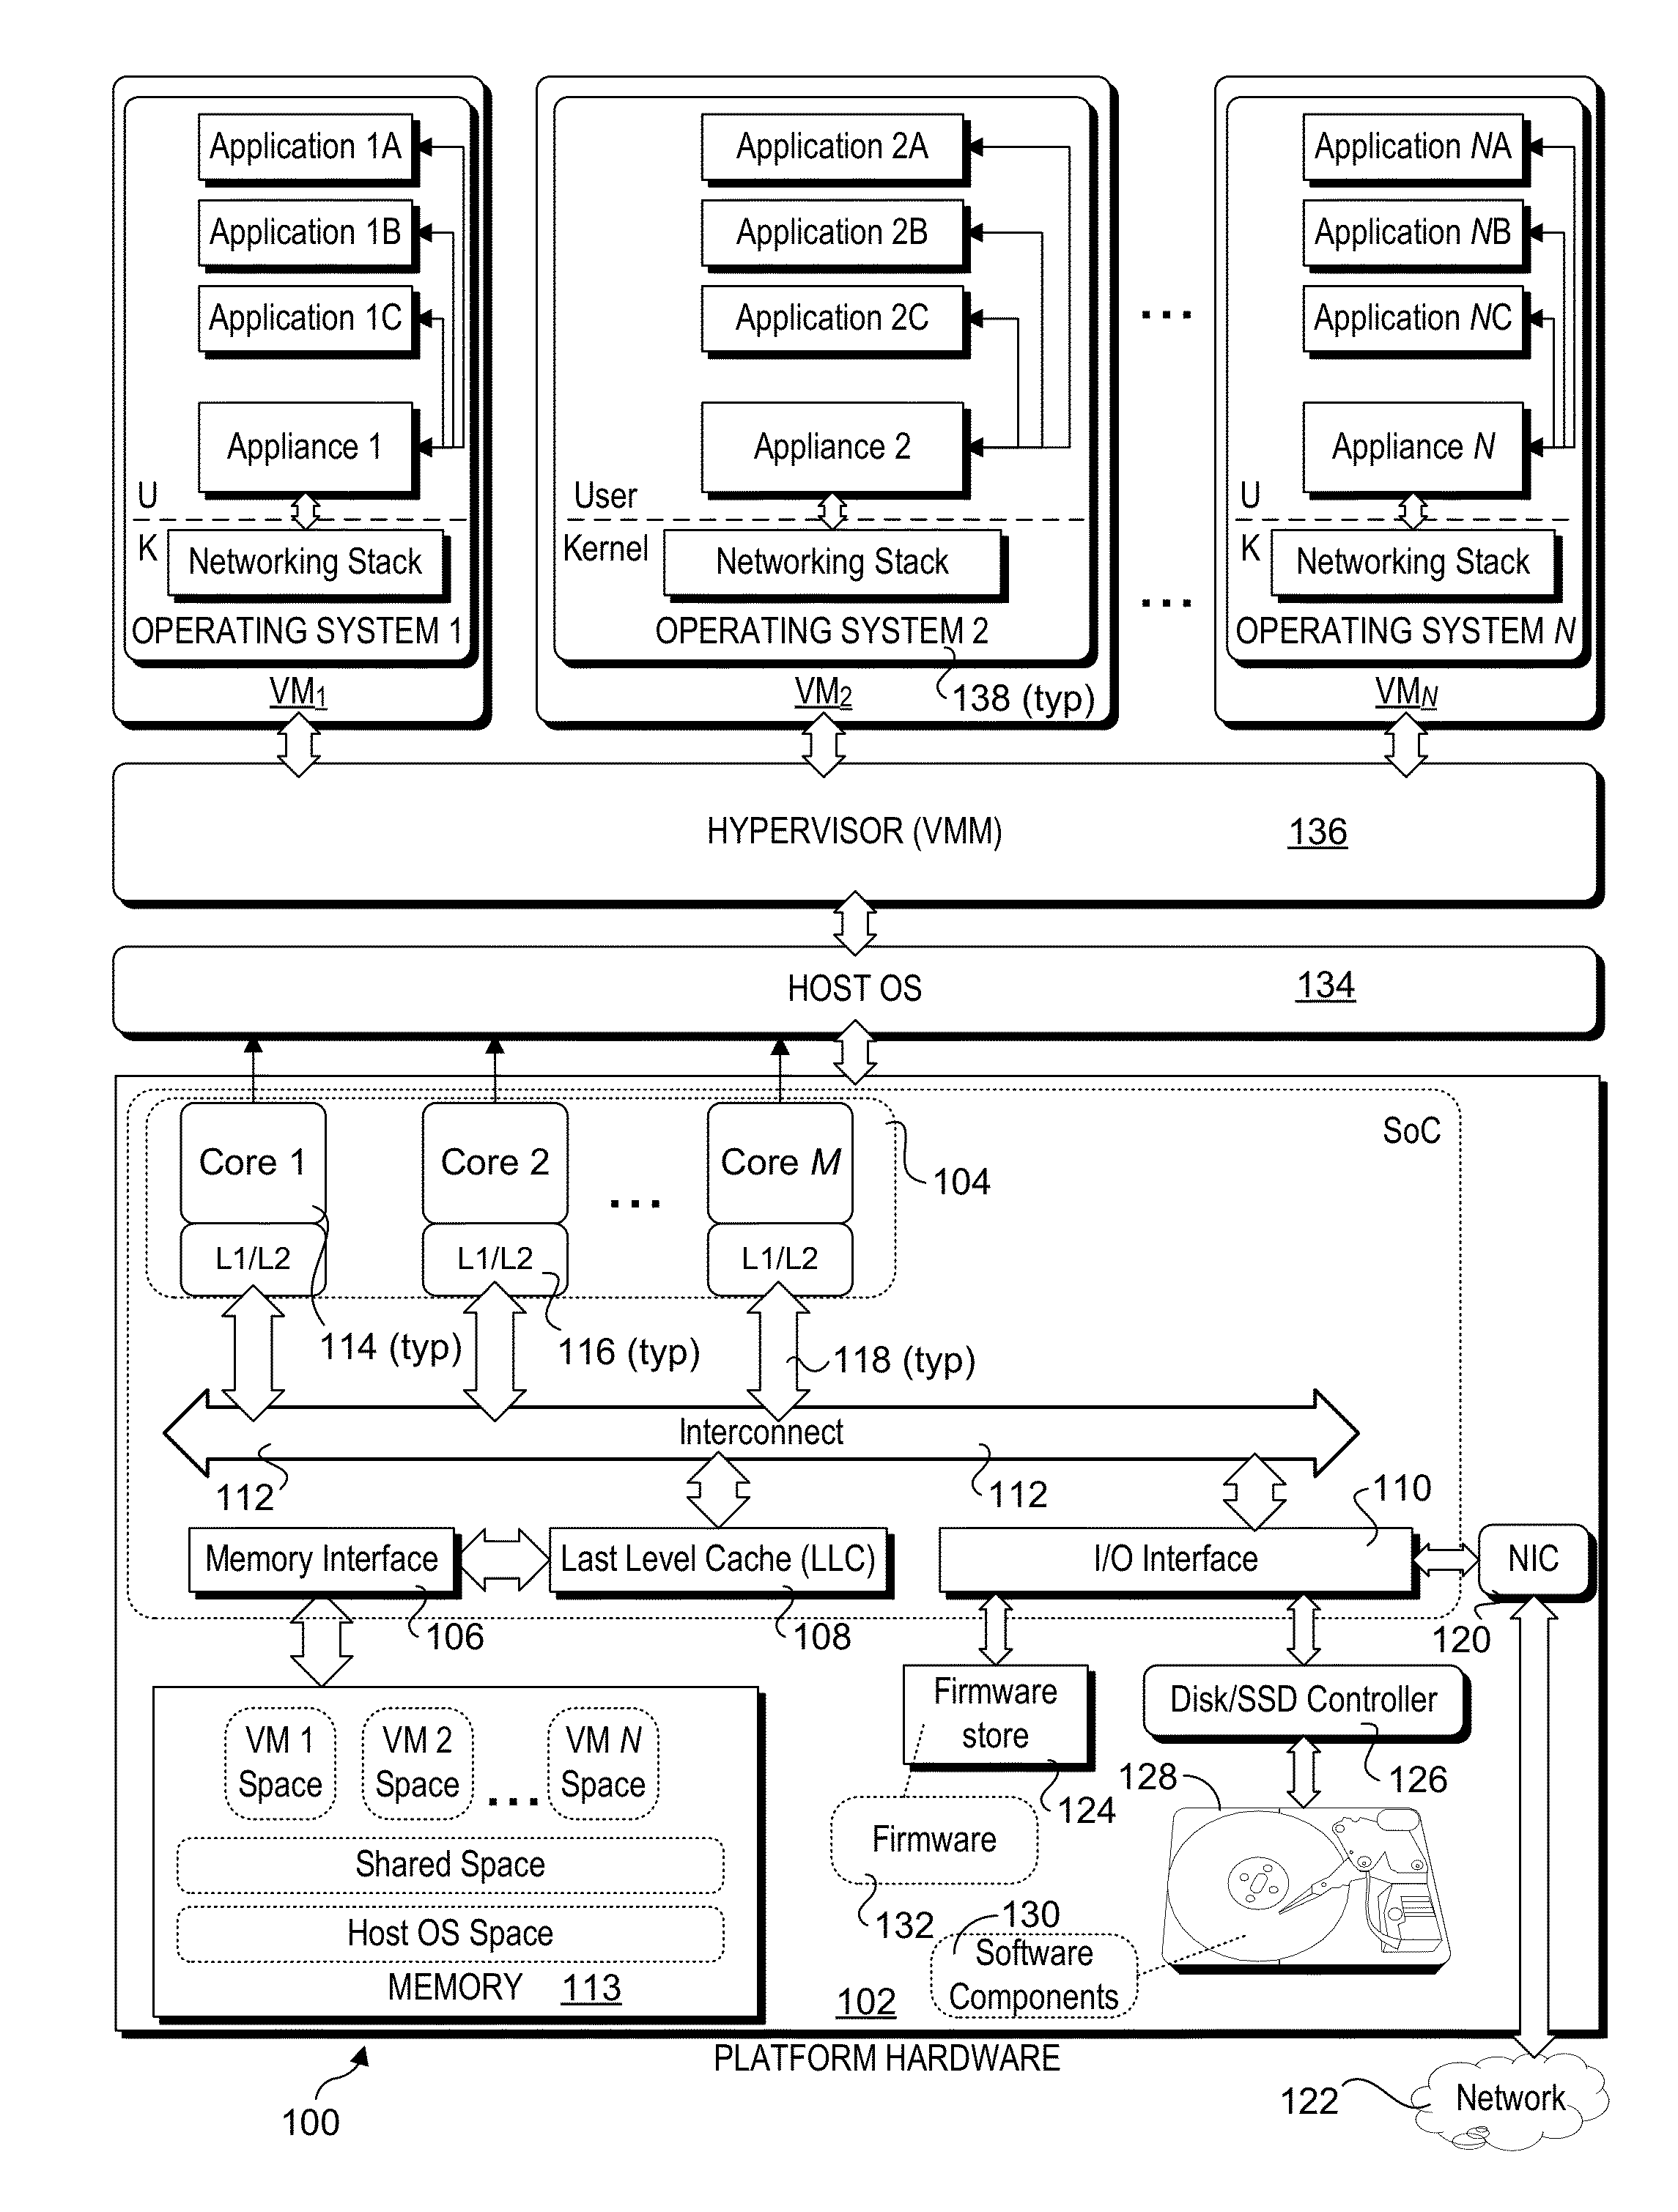 Hardware/software co-optimization to improve performance and energy for inter-vm communication for nfvs and other producer-consumer workloads